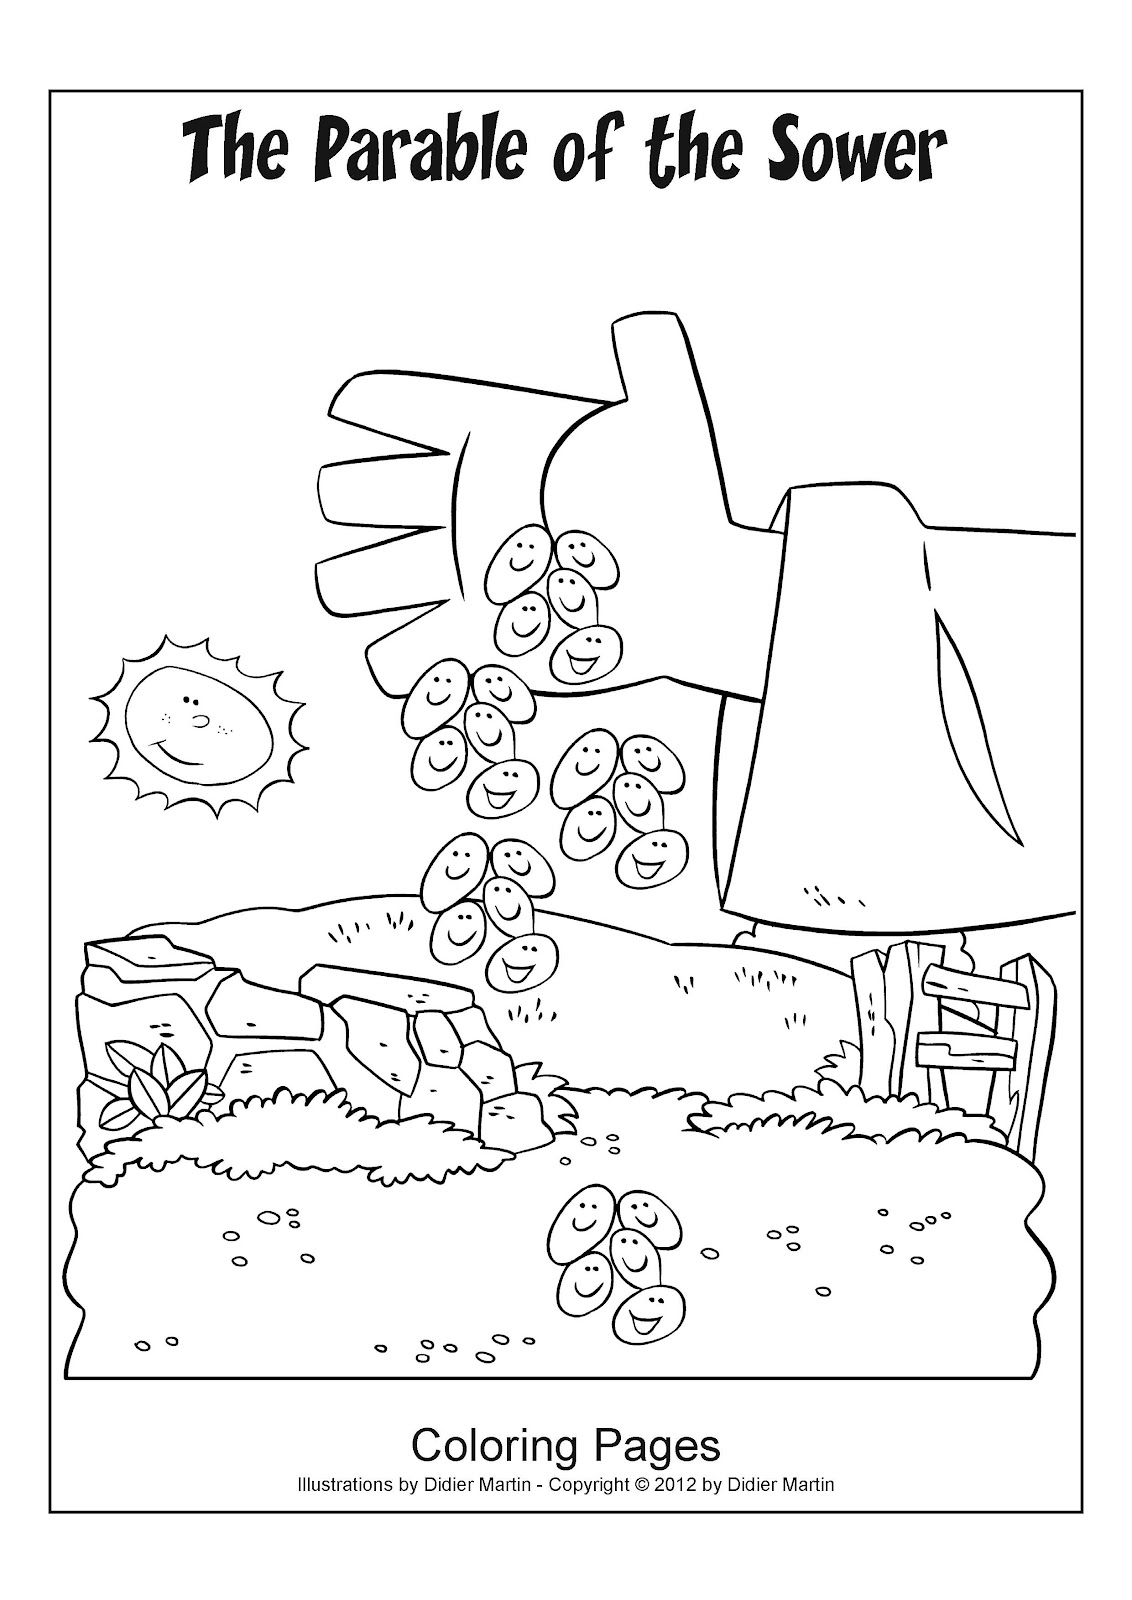 My Little House: Bible Activity Pages - The Parable of the Sower